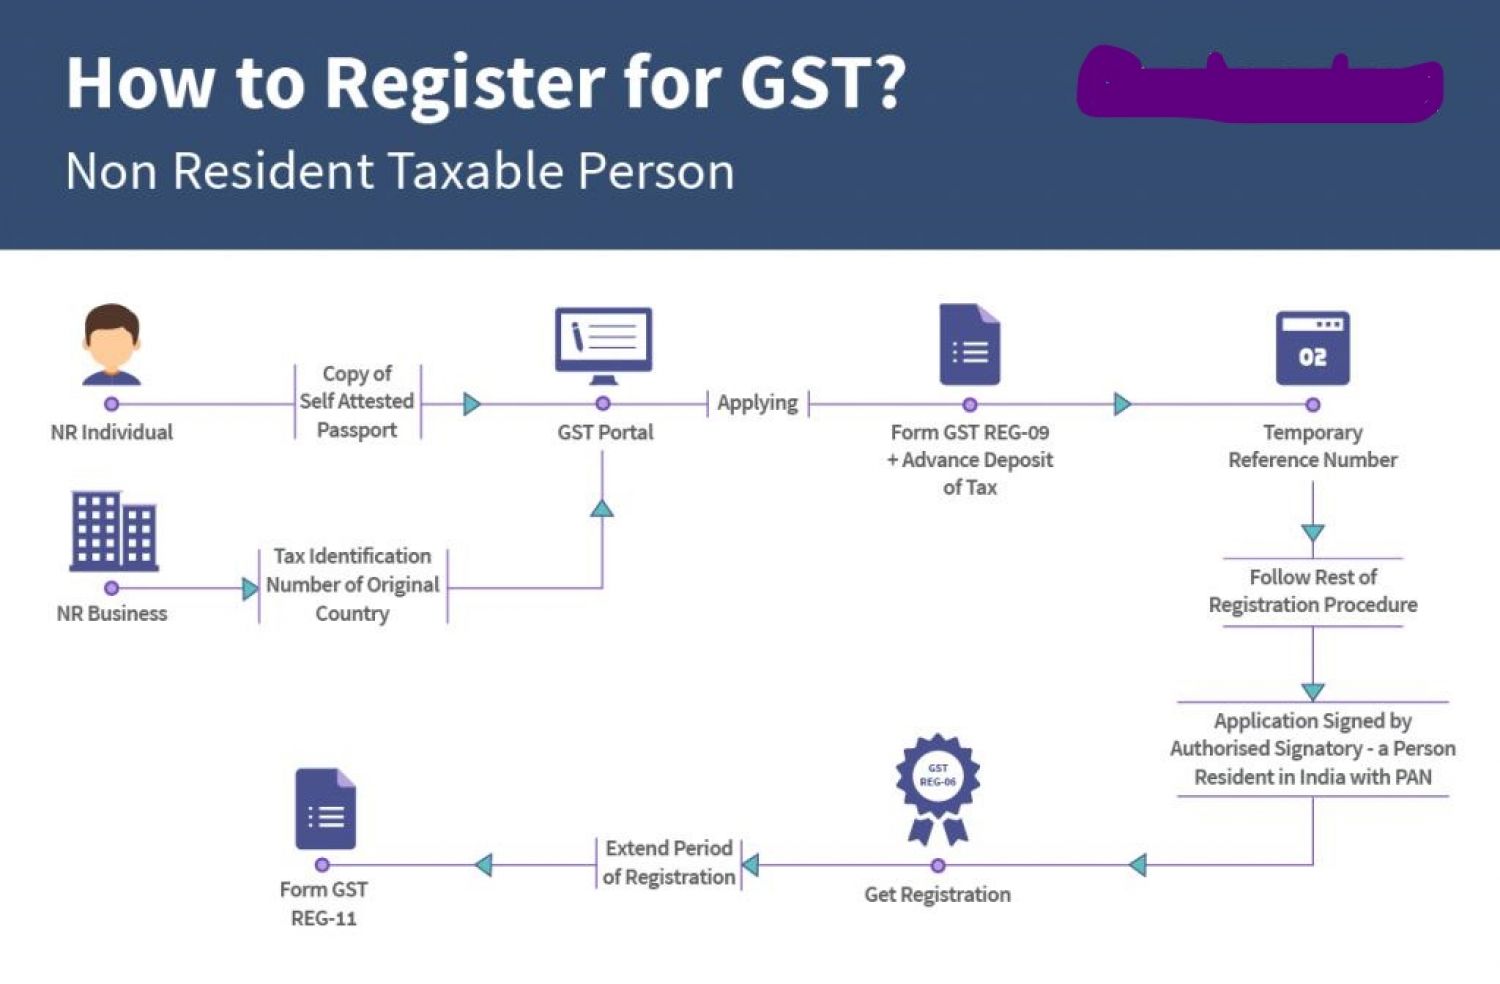 GST Law Applicability on Non Resident Taxable Person